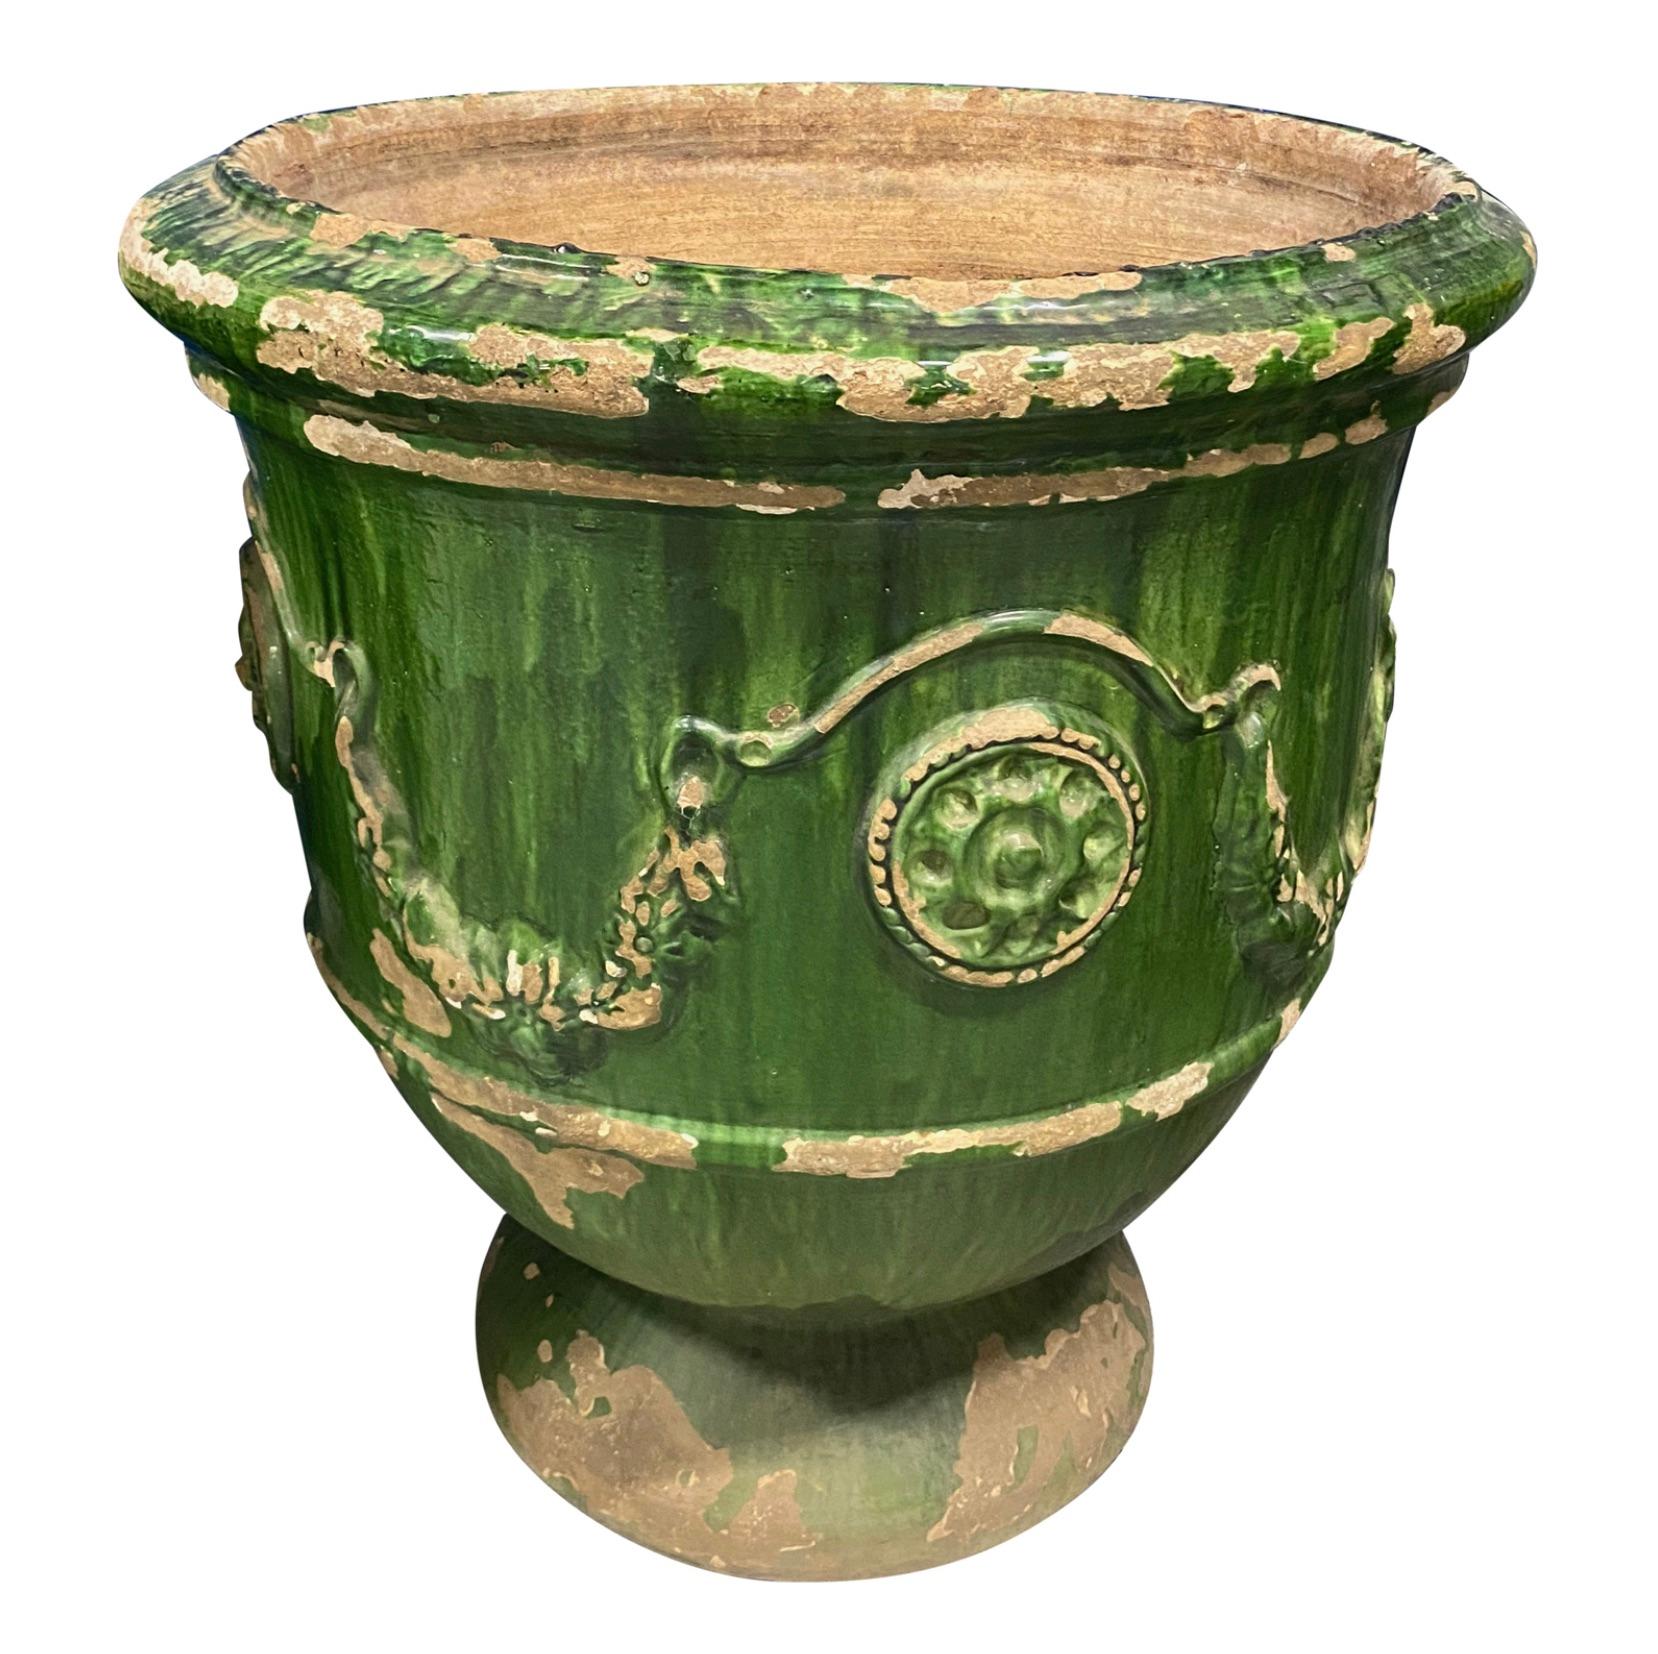 Monumental Green Glazed Italian Terra Cotta Anduze Pots

Two Available

31″H x 30″Diameter at Top x 16″ Diameter at Base